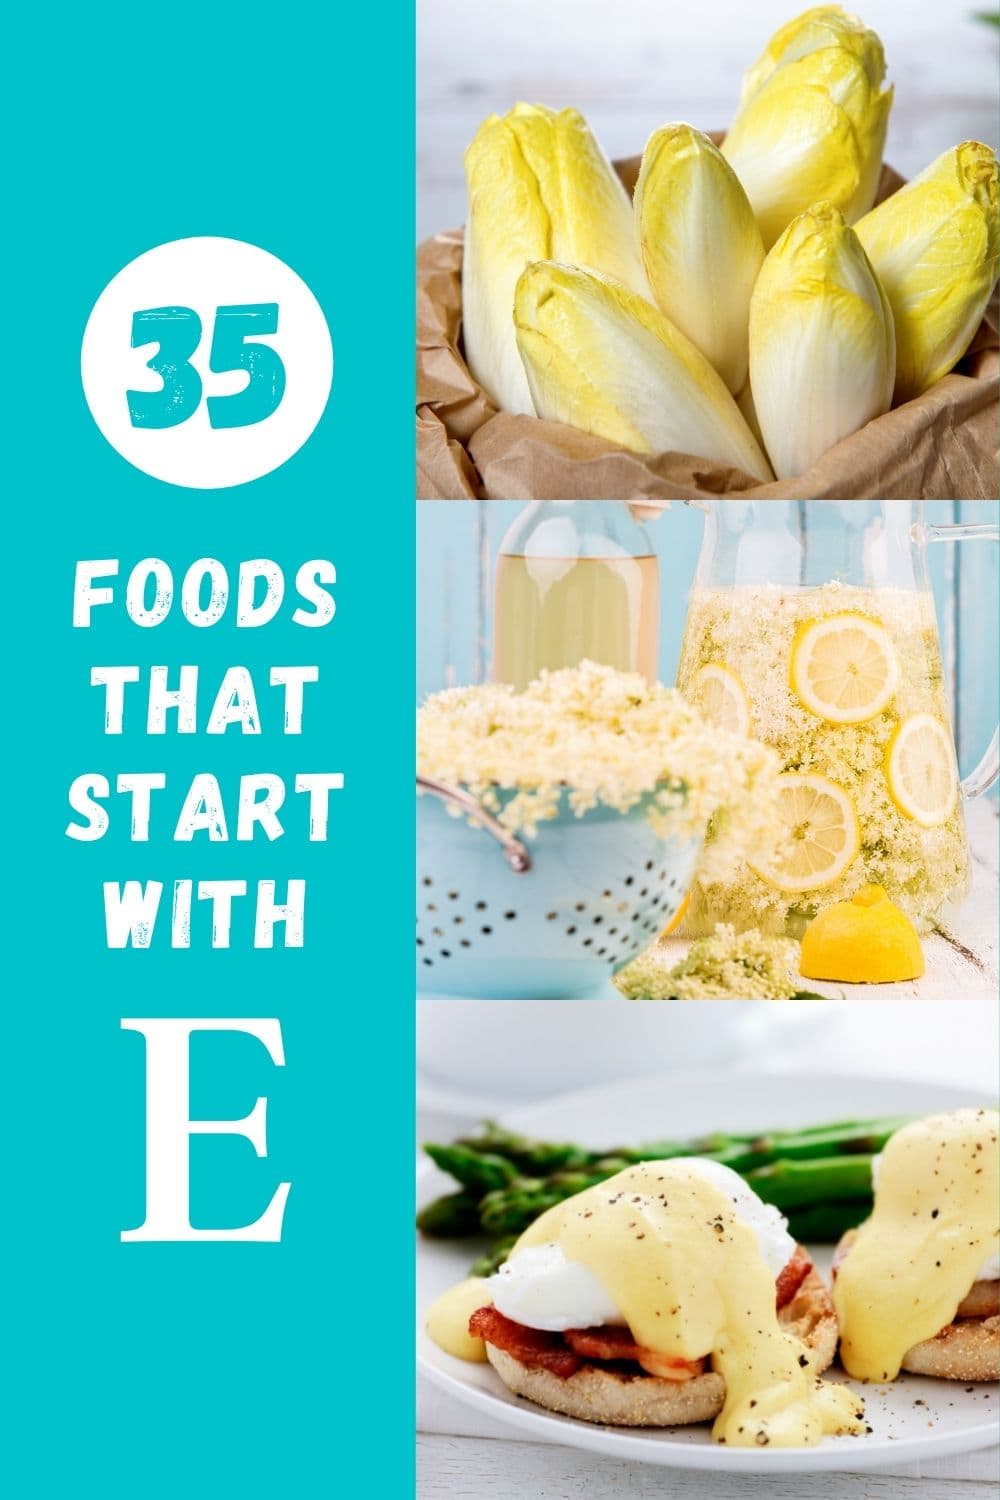 foods that start with E